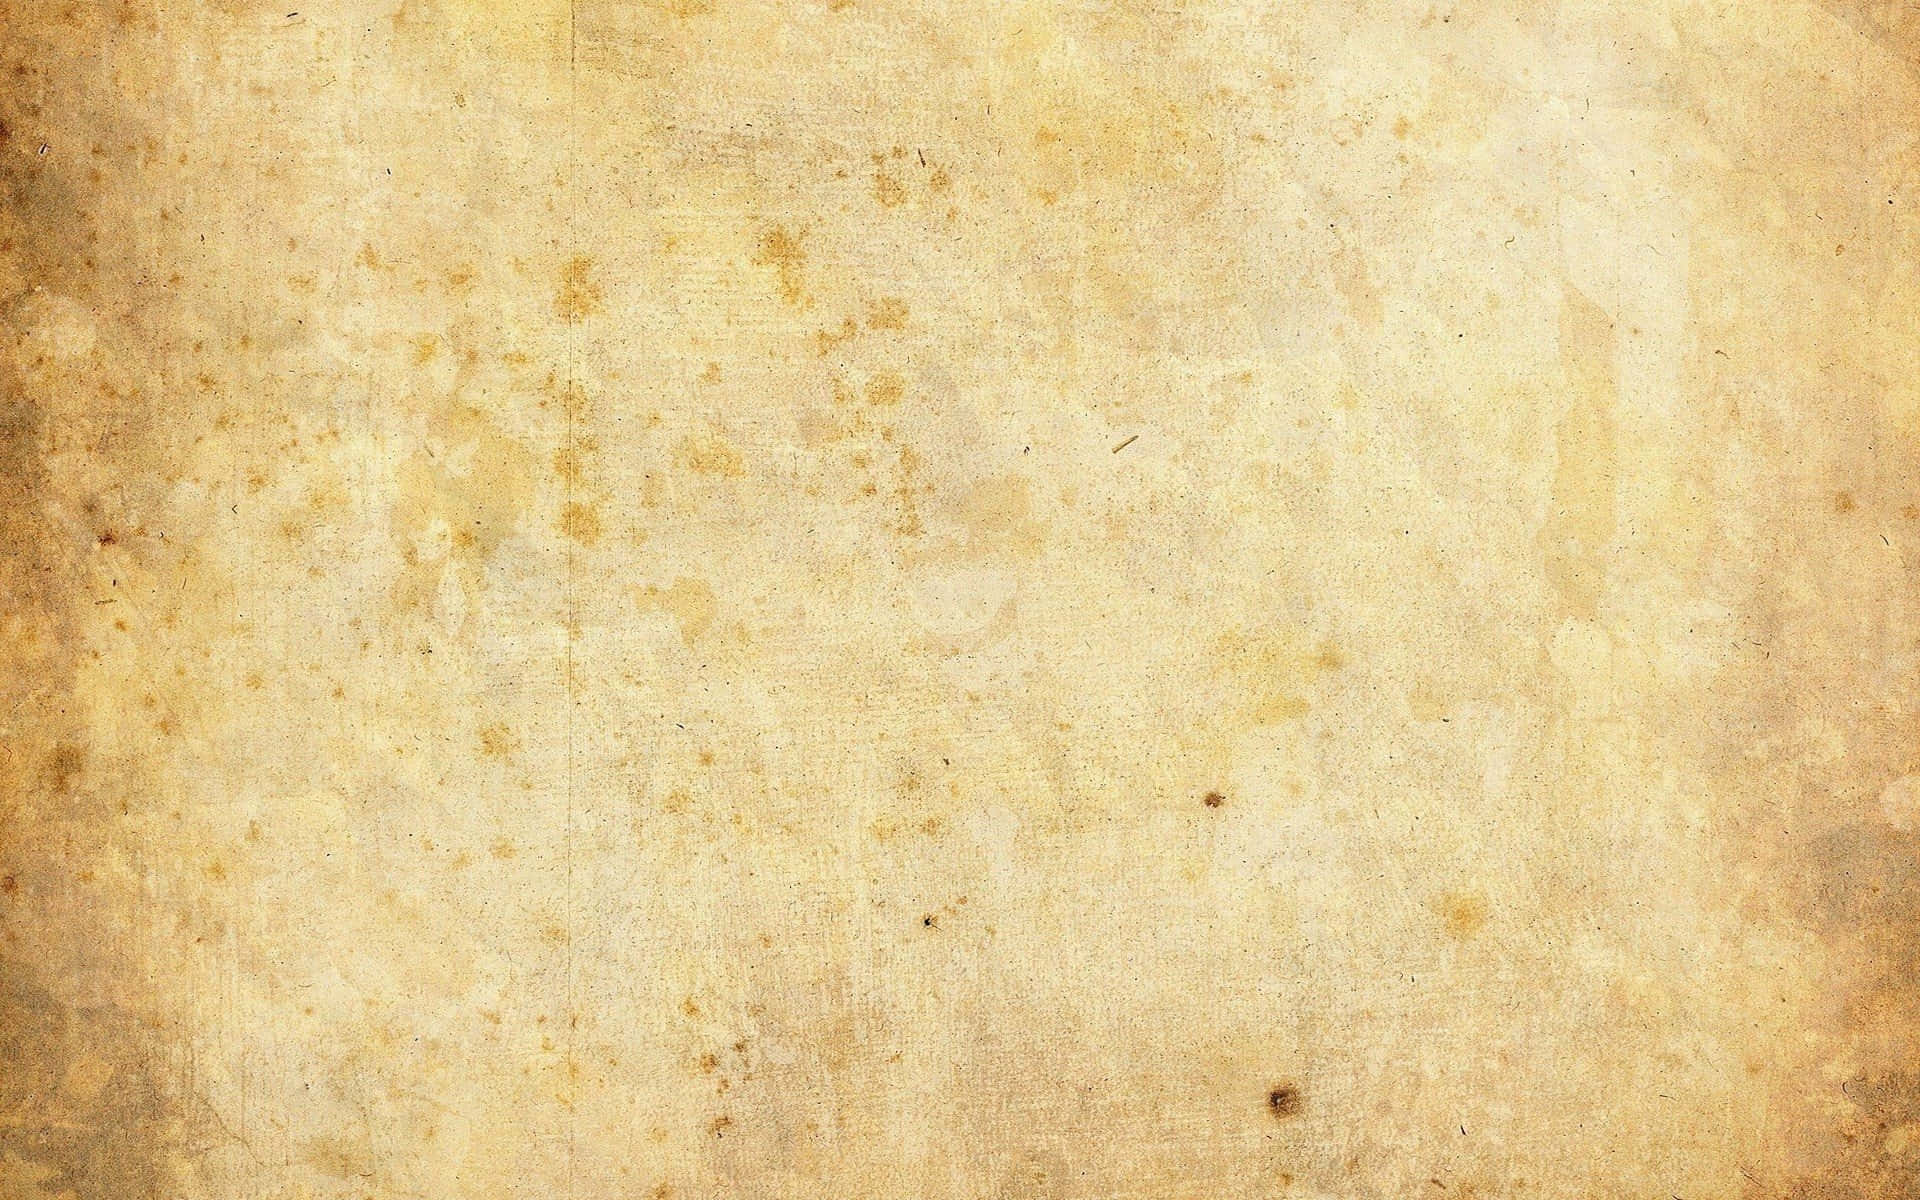 100+] Old Paper Texture Pictures